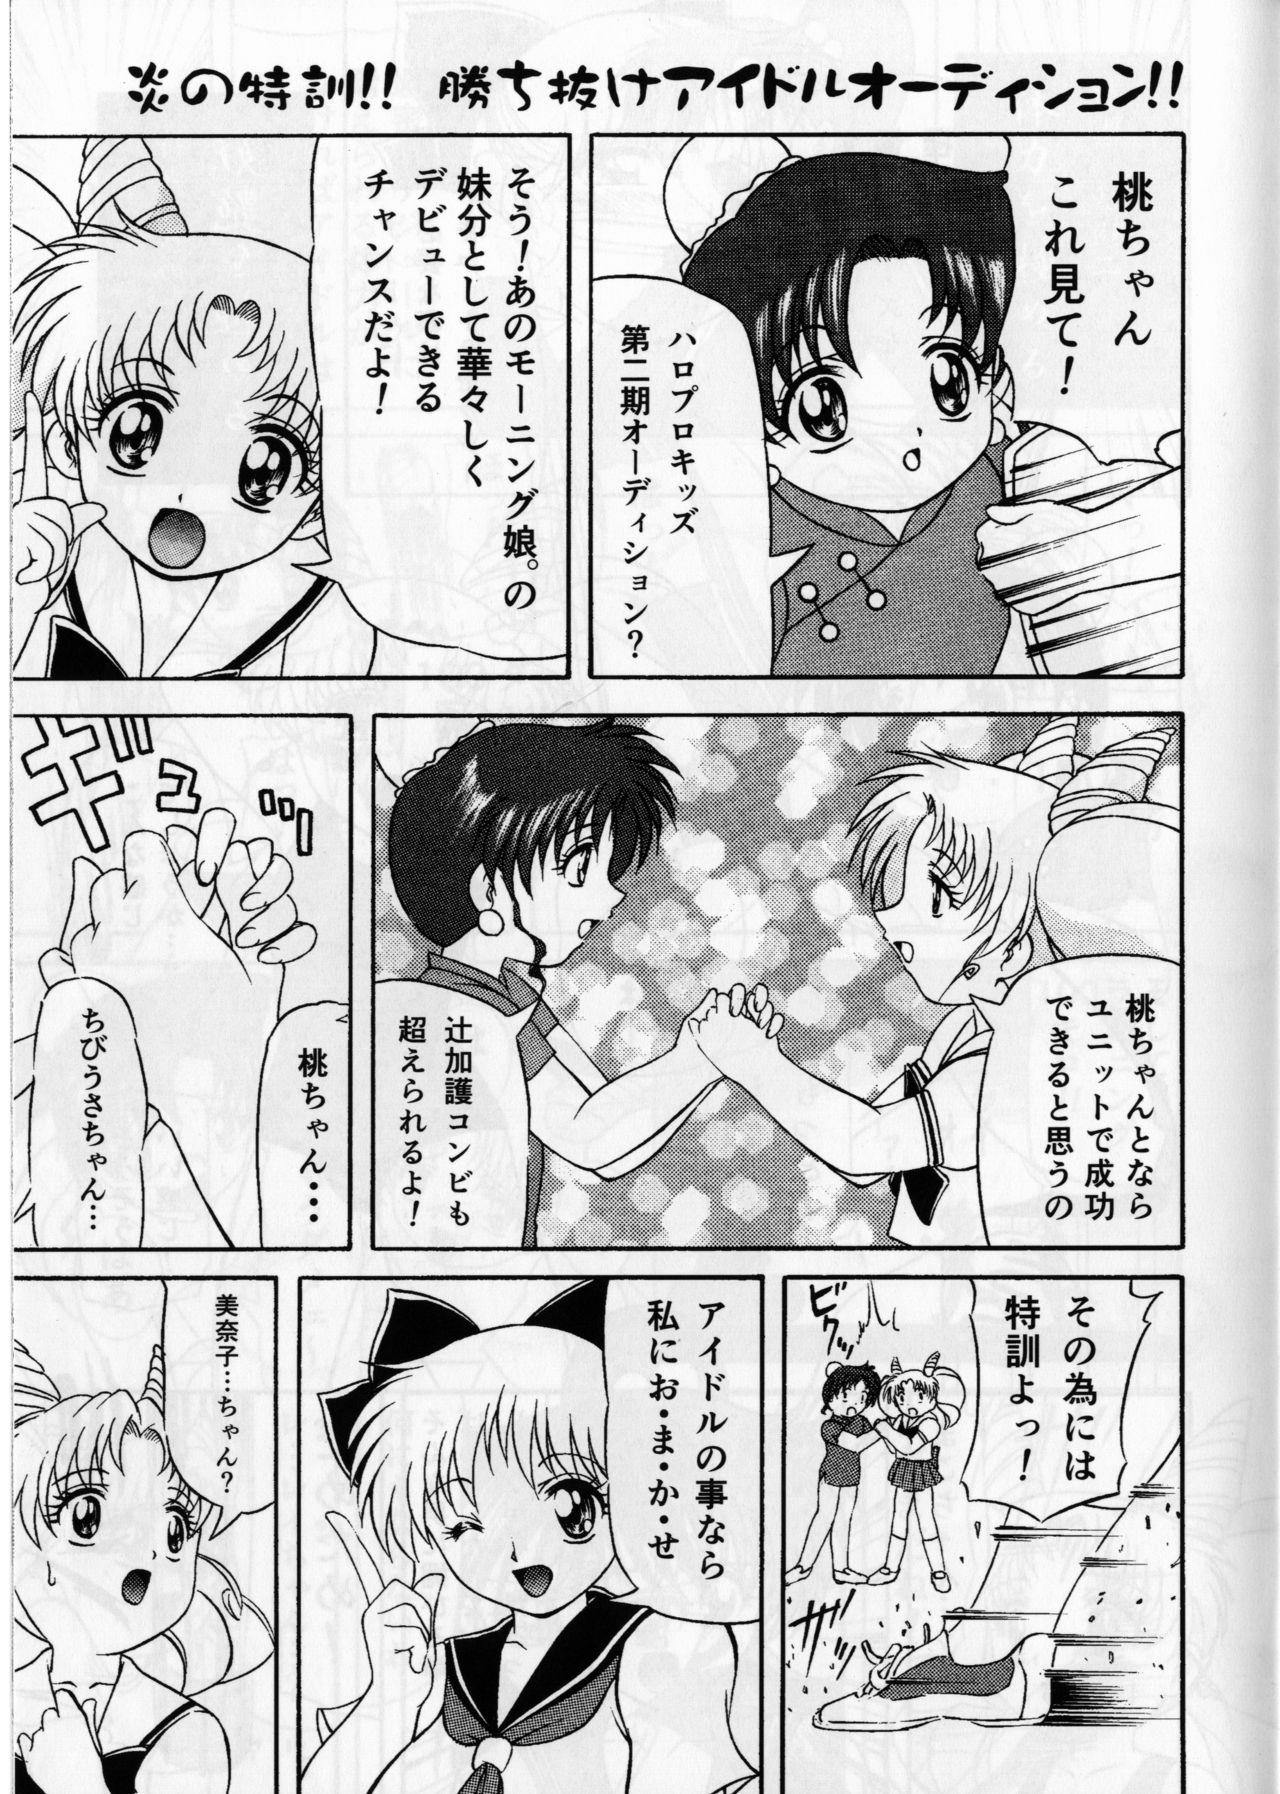 Sex Toys Pink Sugar 20th Anniversary Special - Sailor moon Joven - Page 7